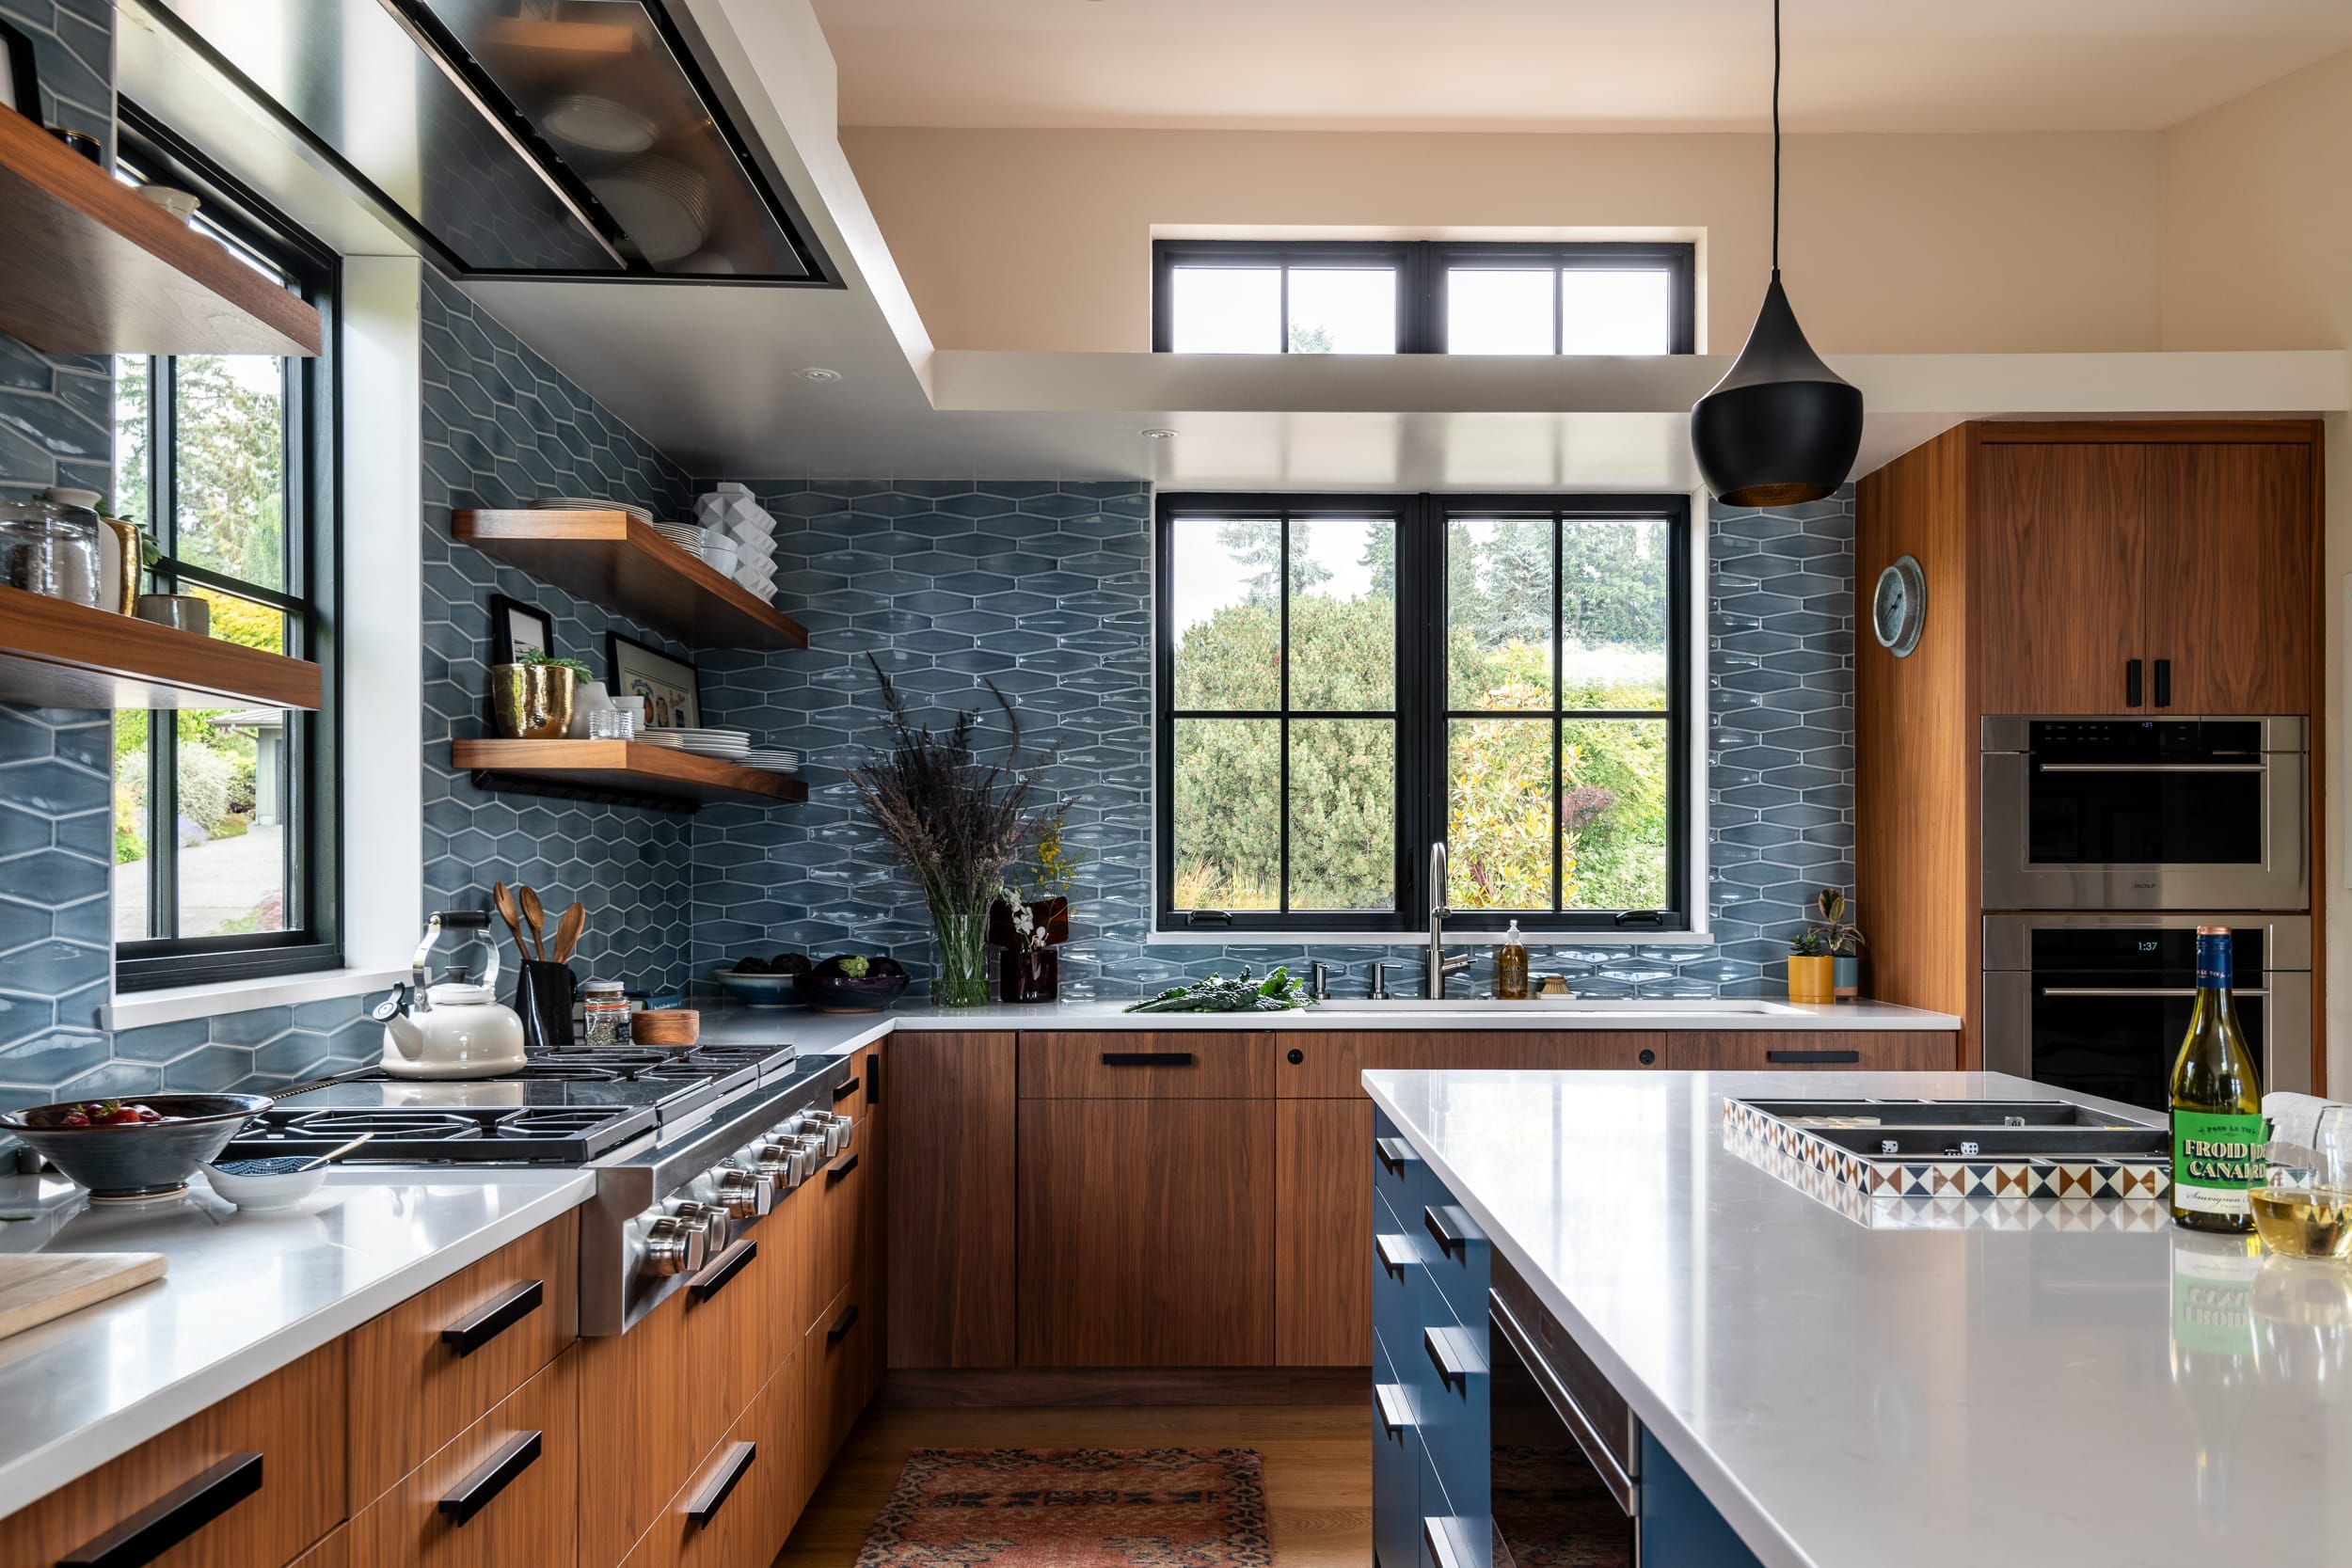 A modern kitchen with blue tile and wooden cabinets.